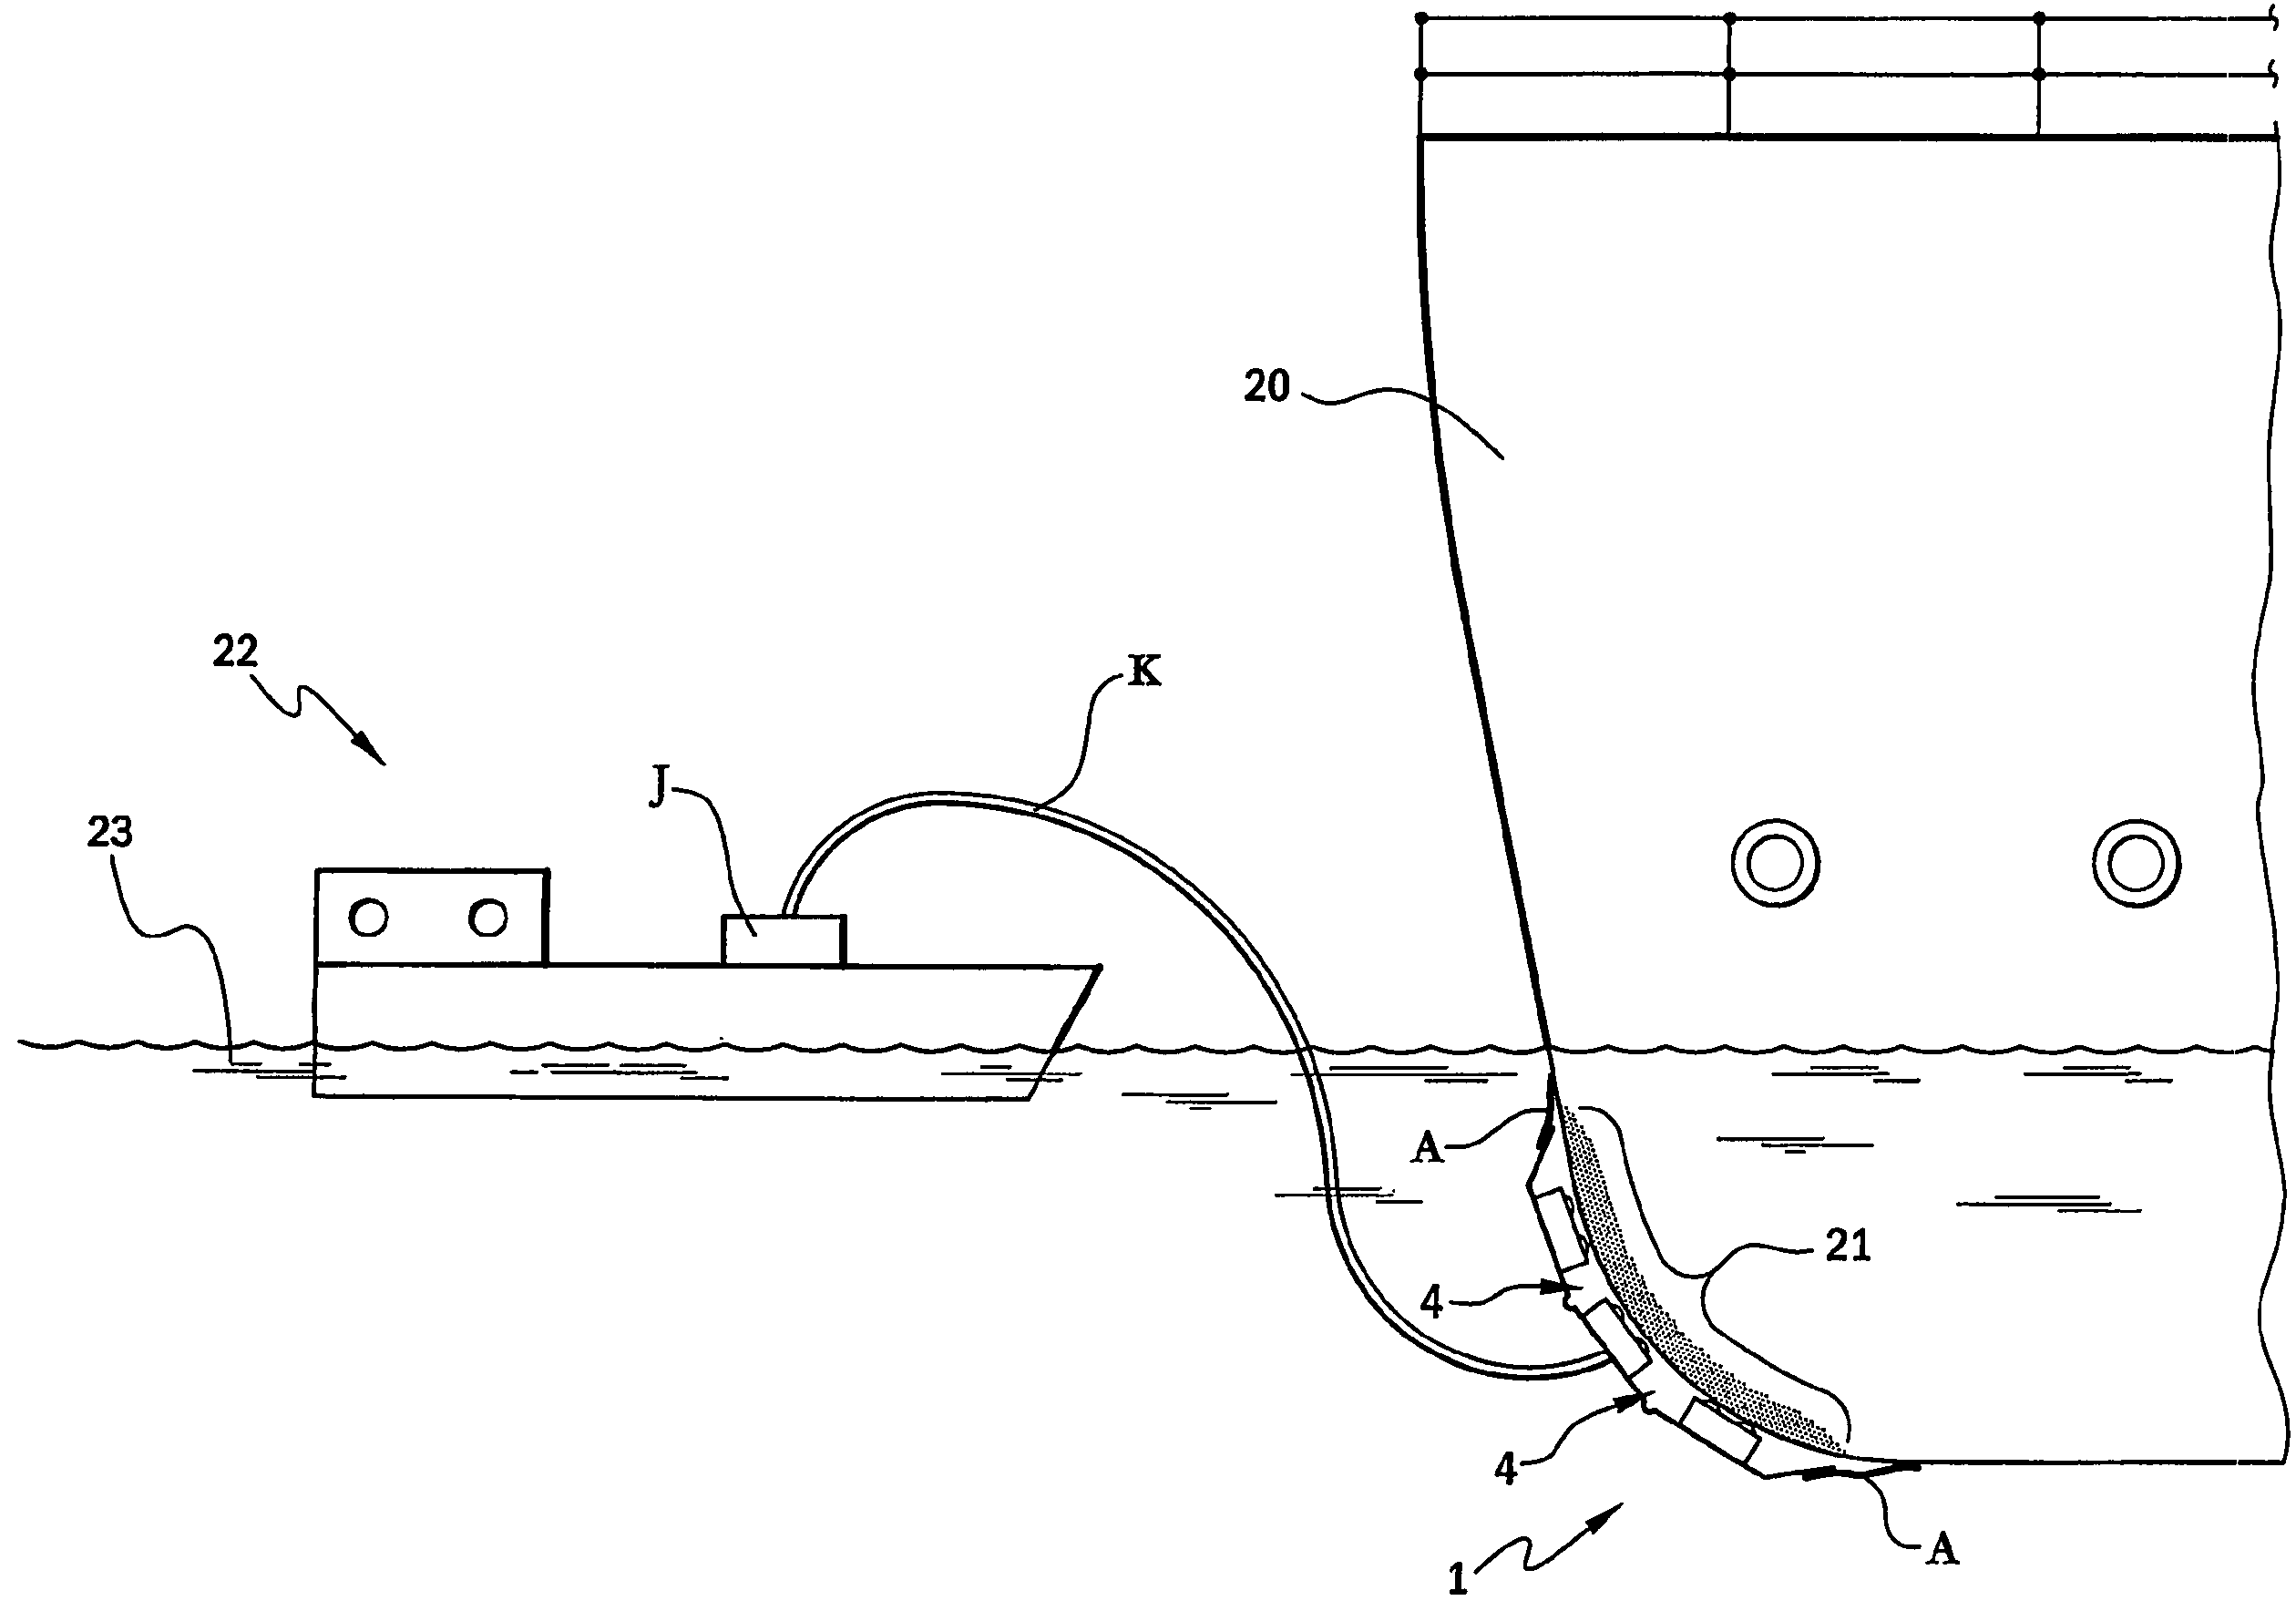 Method and apparatus for treating marine growth on a surface